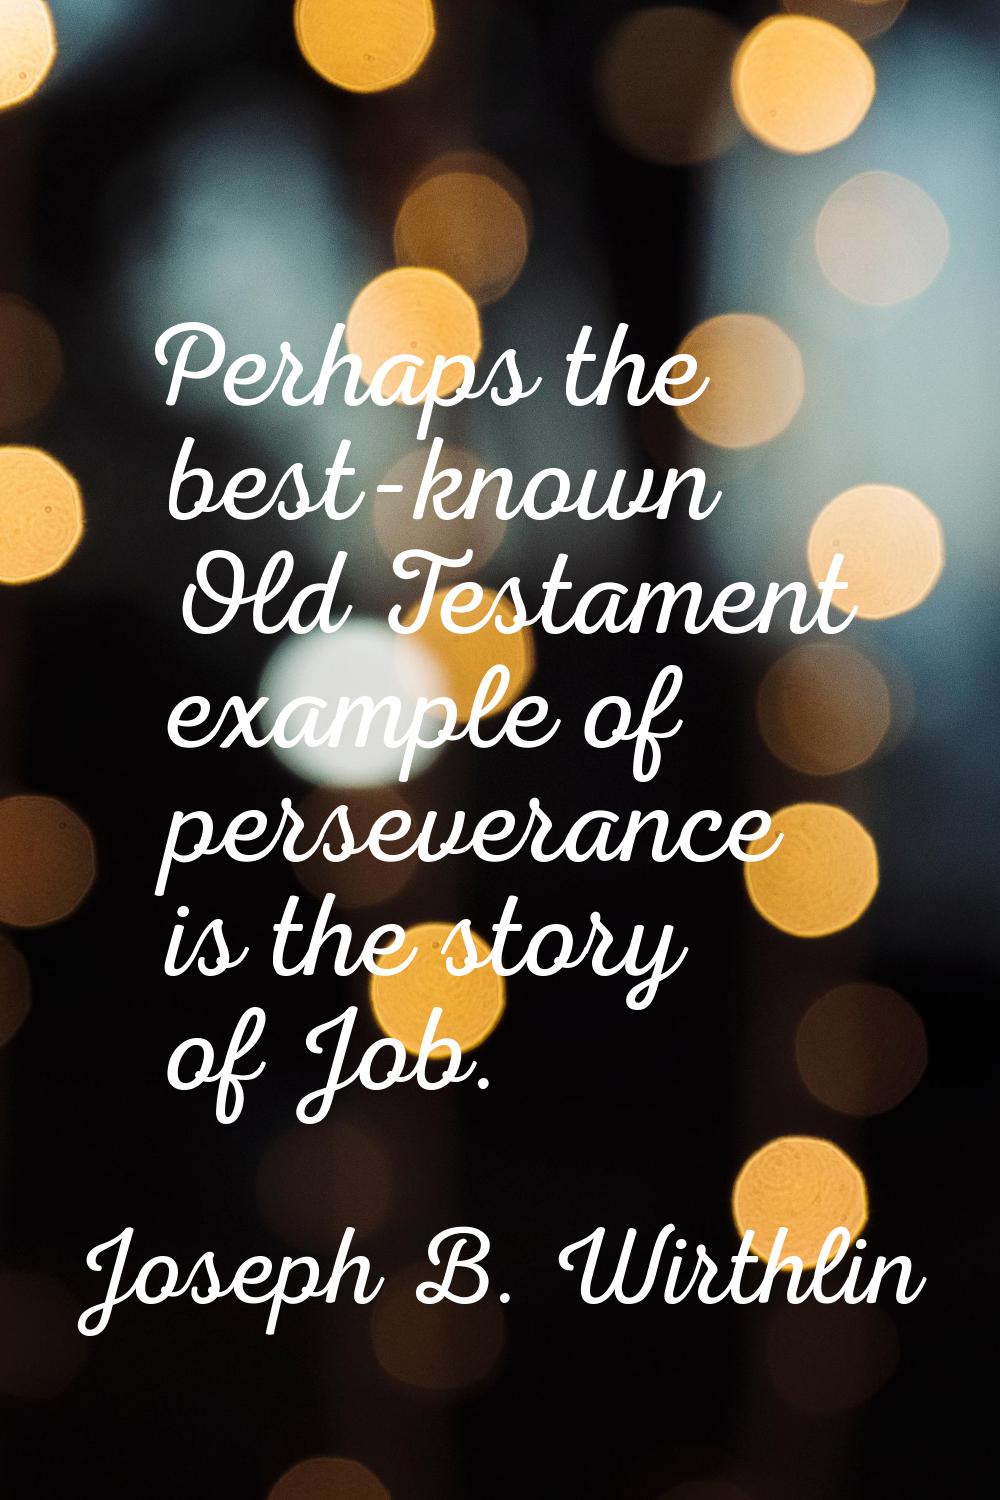 Perhaps the best-known Old Testament example of perseverance is the story of Job.